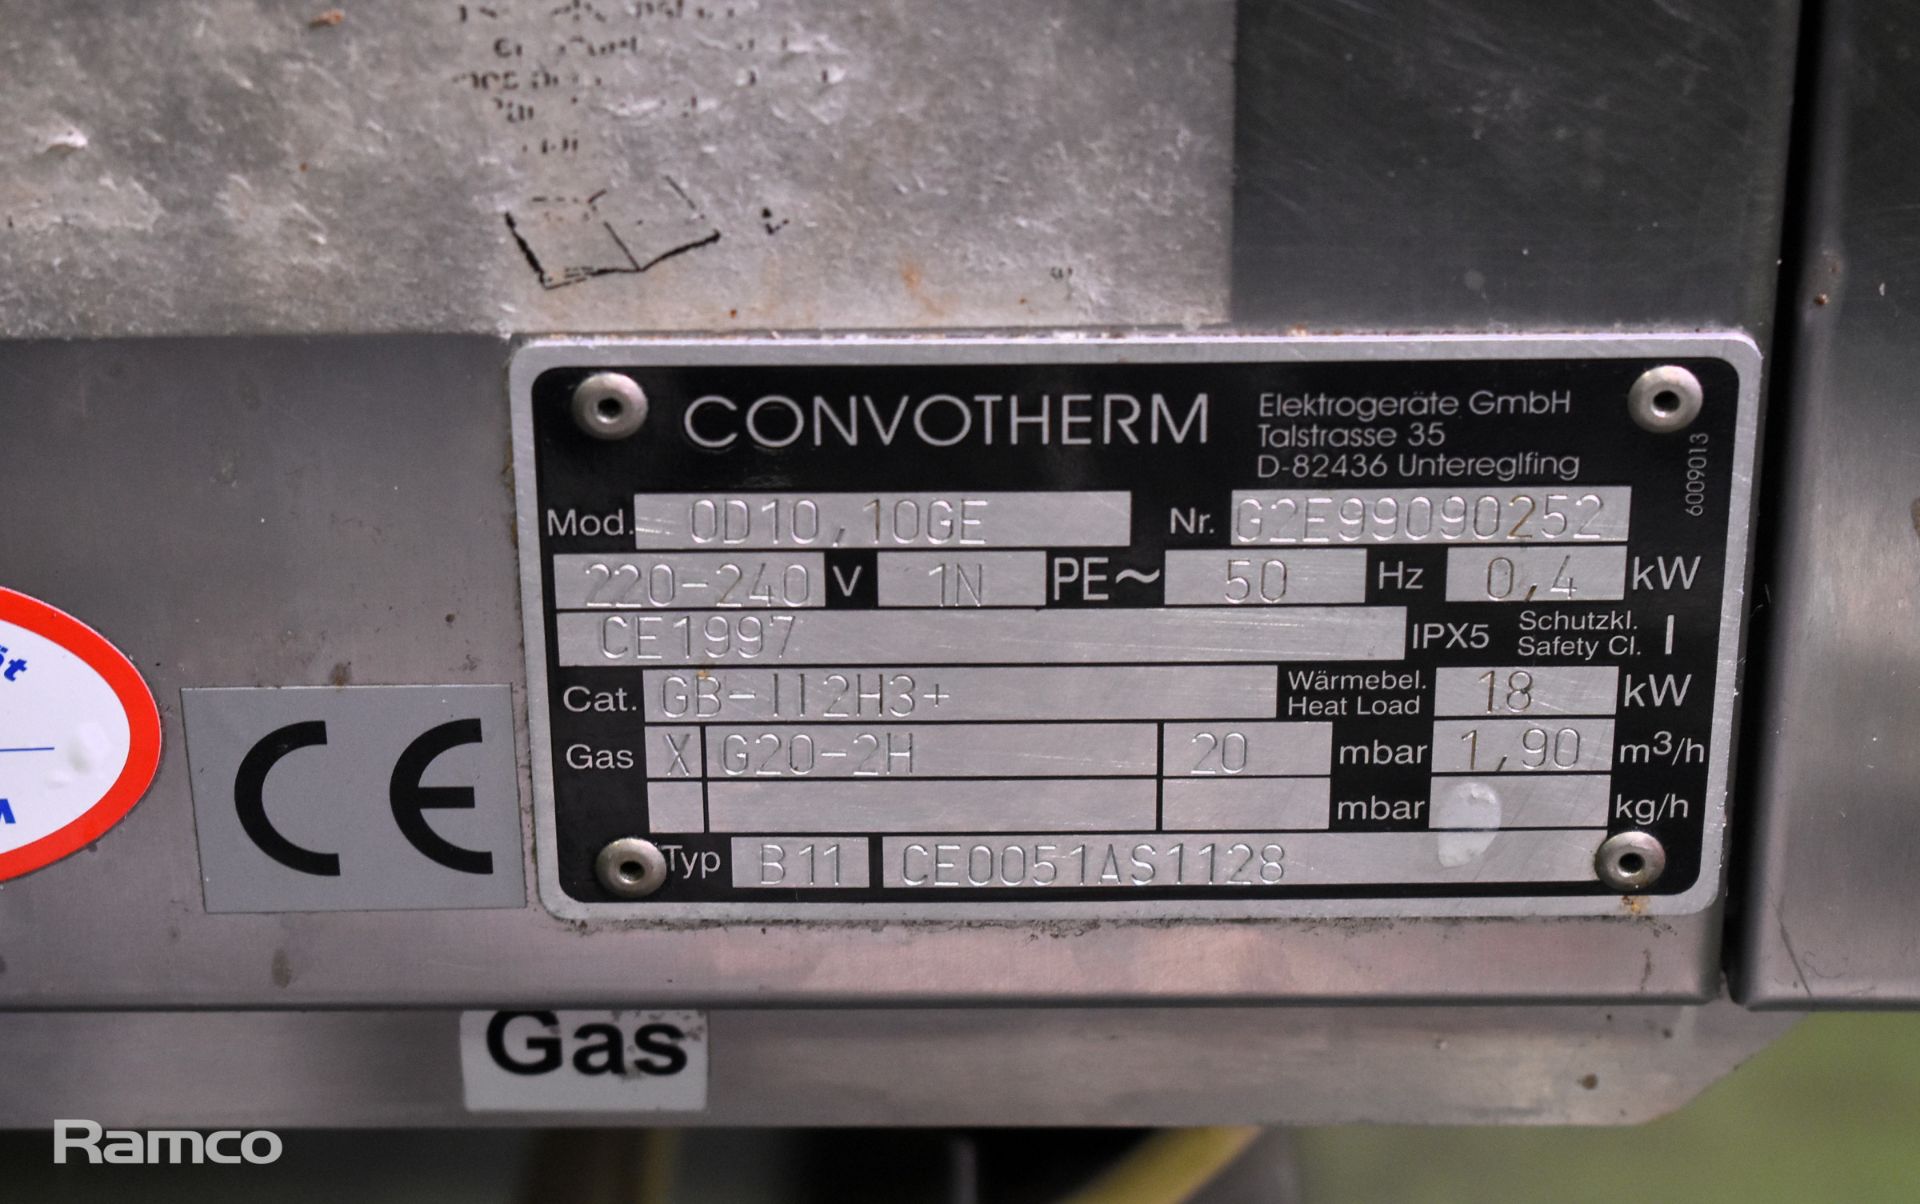 Convotherm OOD10-10GE commercial catering oven - W 950 x D 800 x H 1650mm - Image 6 of 7